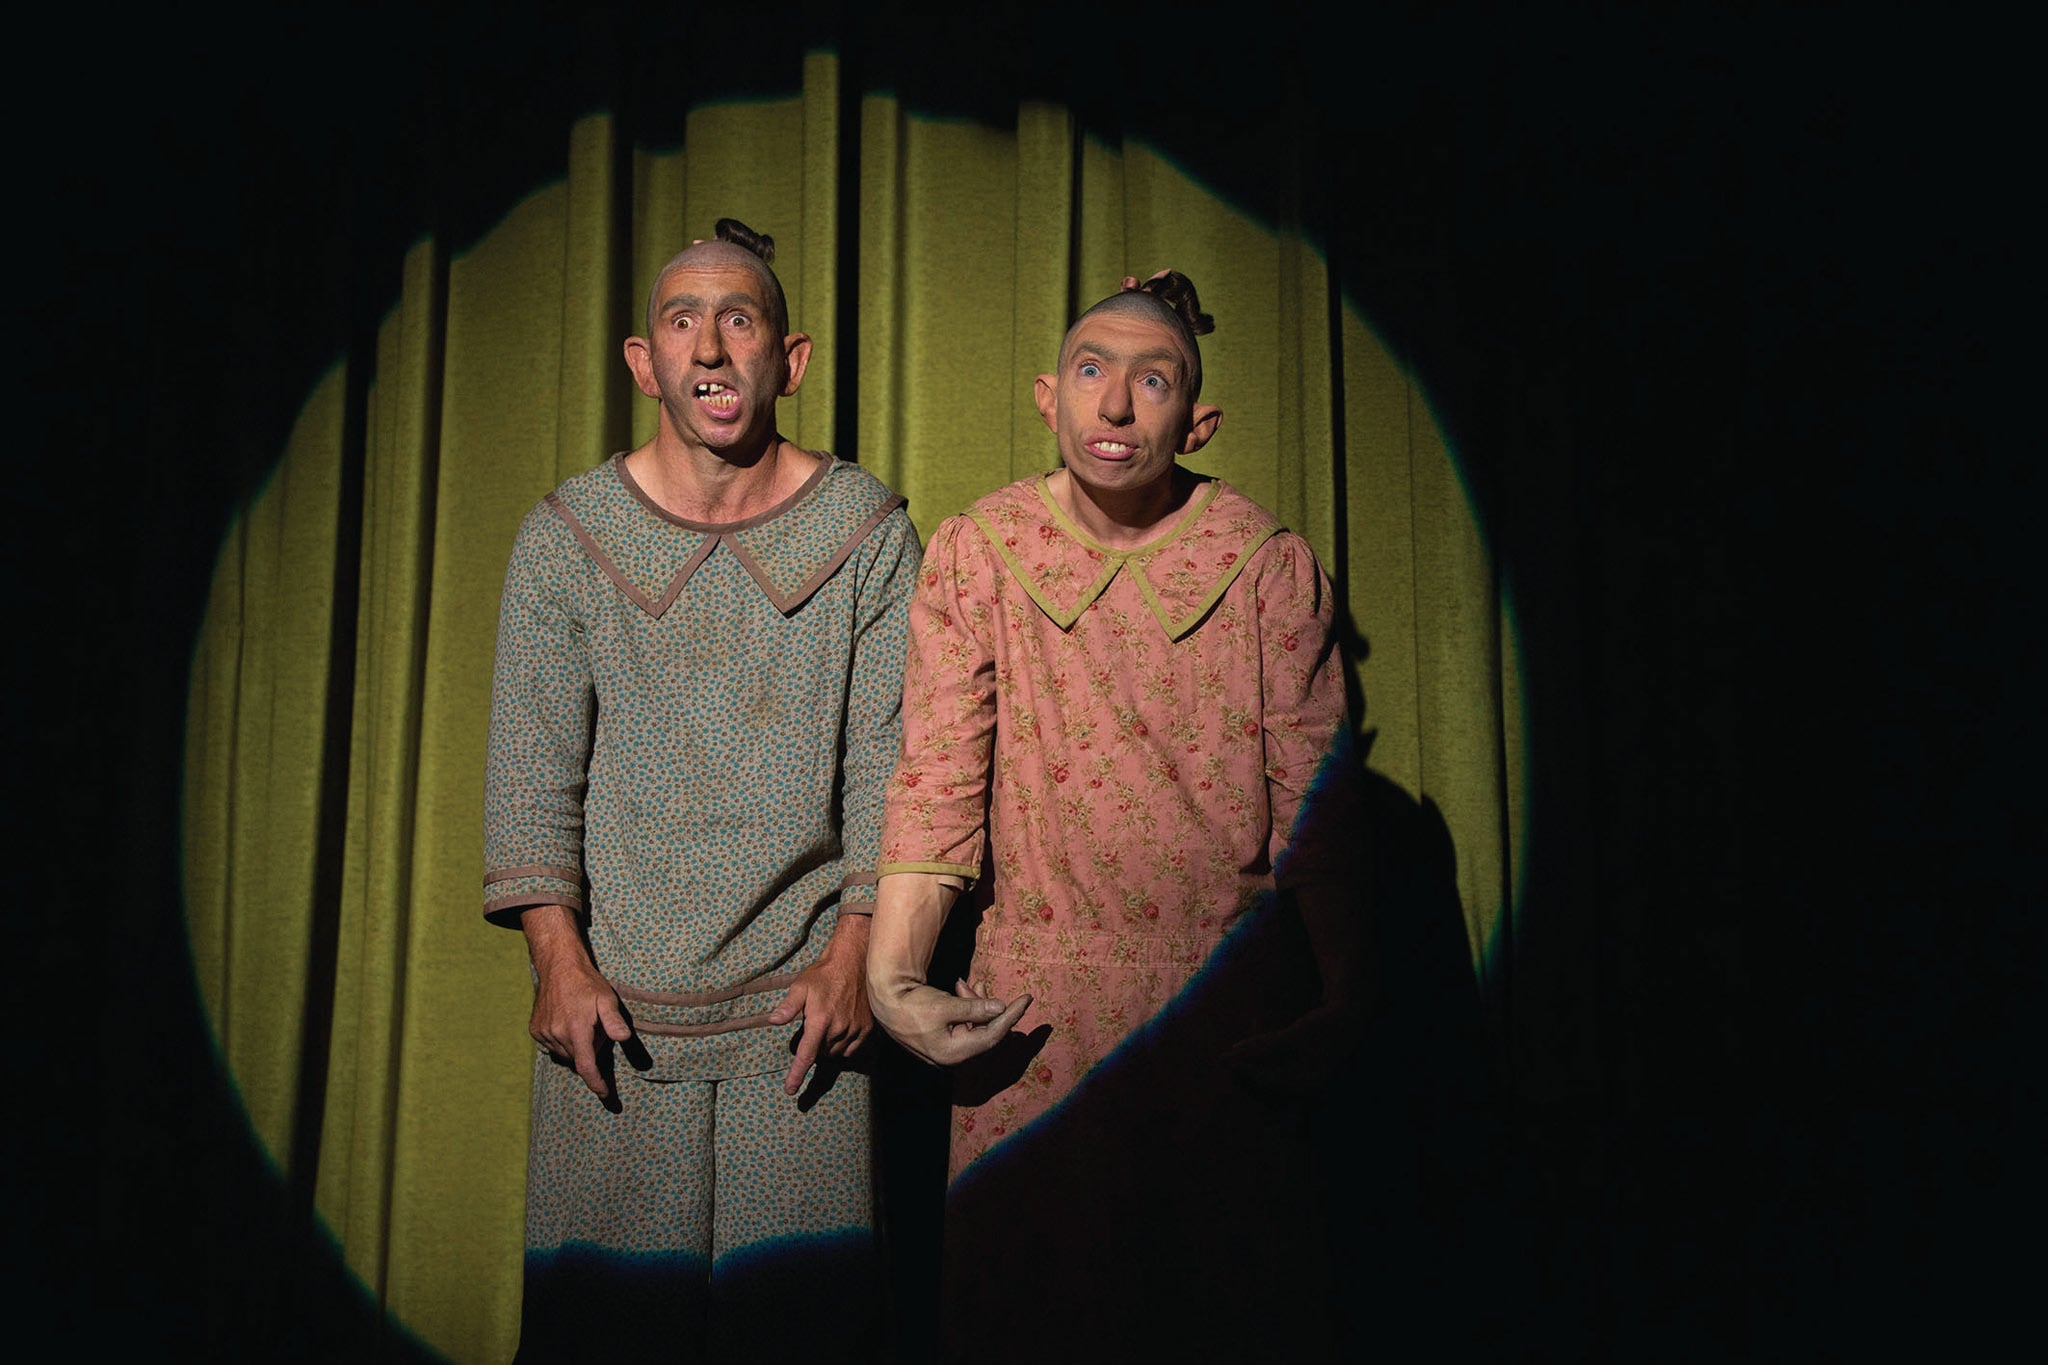 Salty (Christopher Neiman) and Pepper (Naomi Grossman) in 'Monsters Among Us' in American Horror Story